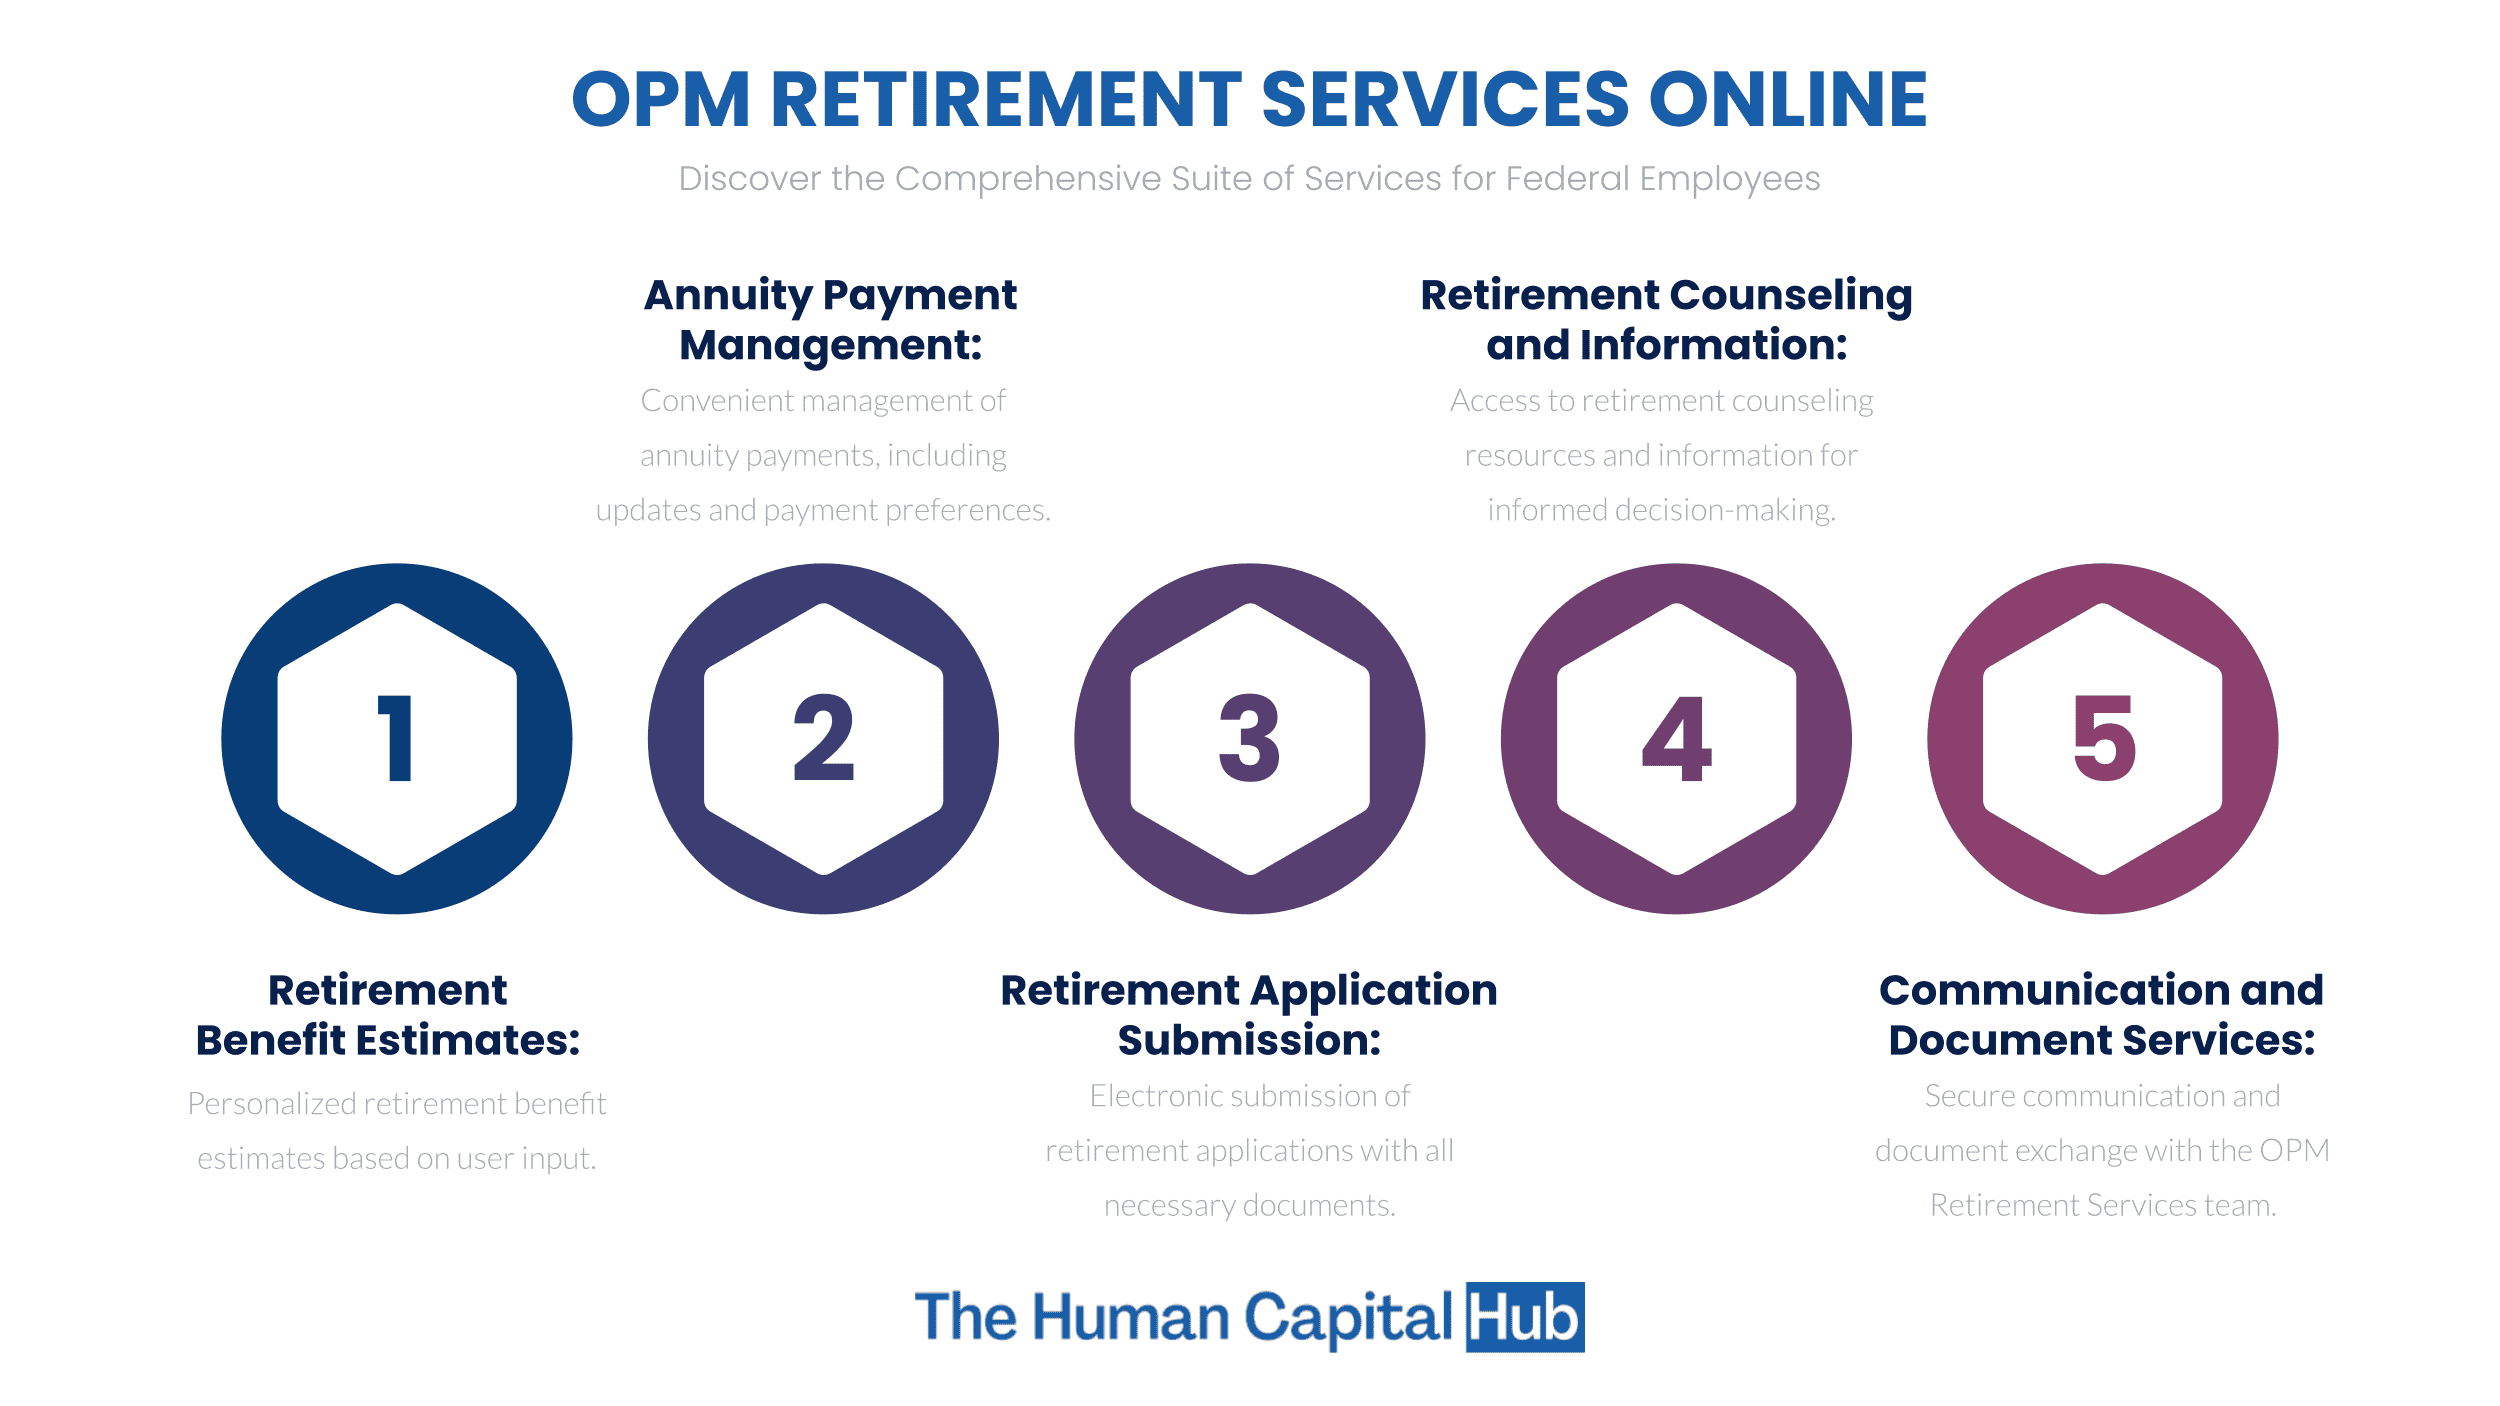 Office of Personnel Management Retirement Services Online: What You Need To Know